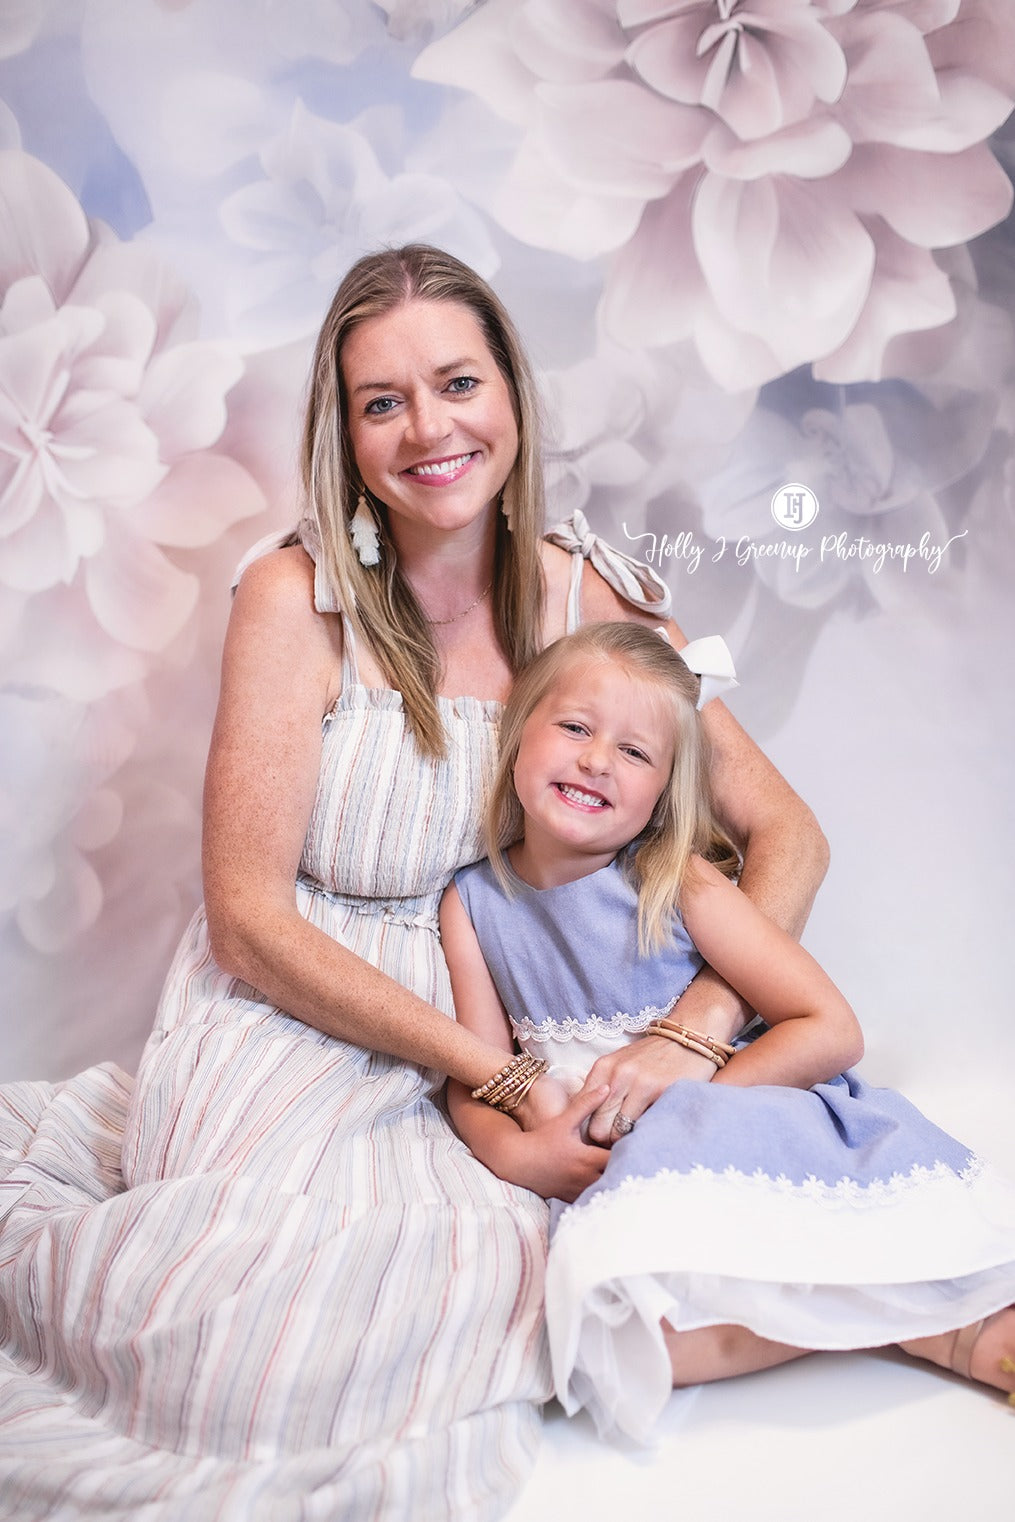 Kate Fine Art Floral Backdrop for Photography